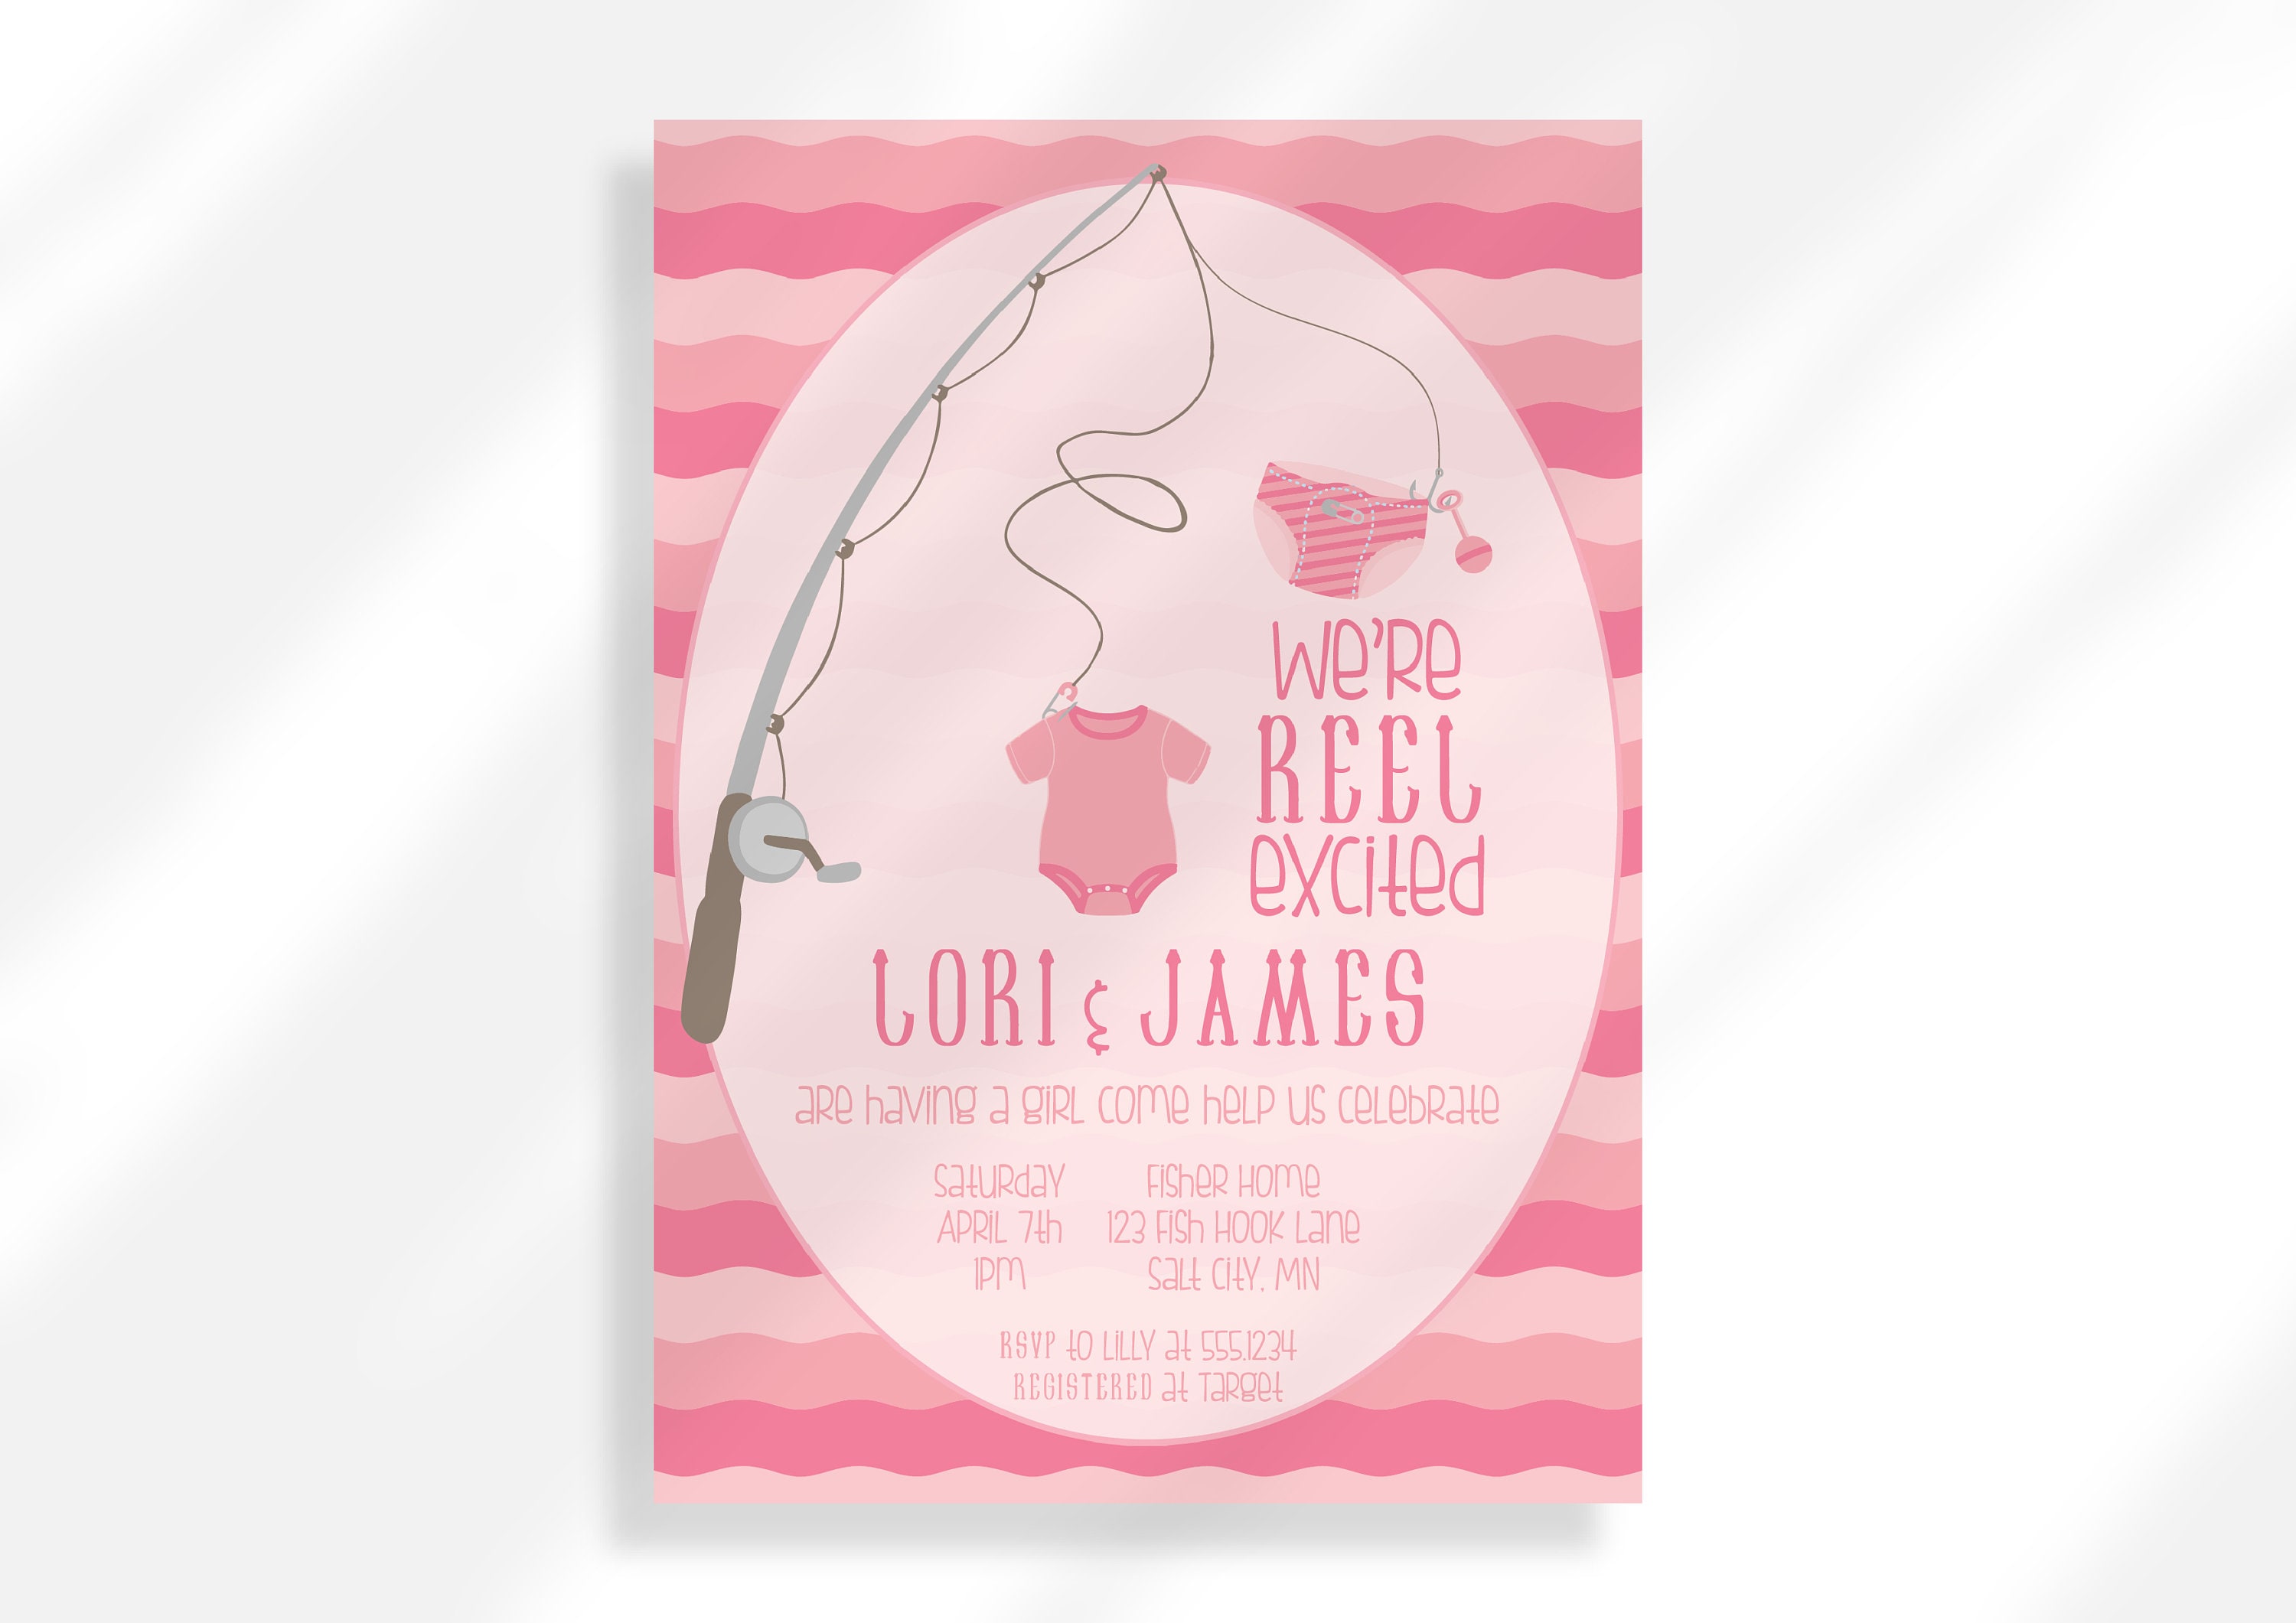 Reel Excited Baby Shower Bundle Customized Invite, Fishing Baby